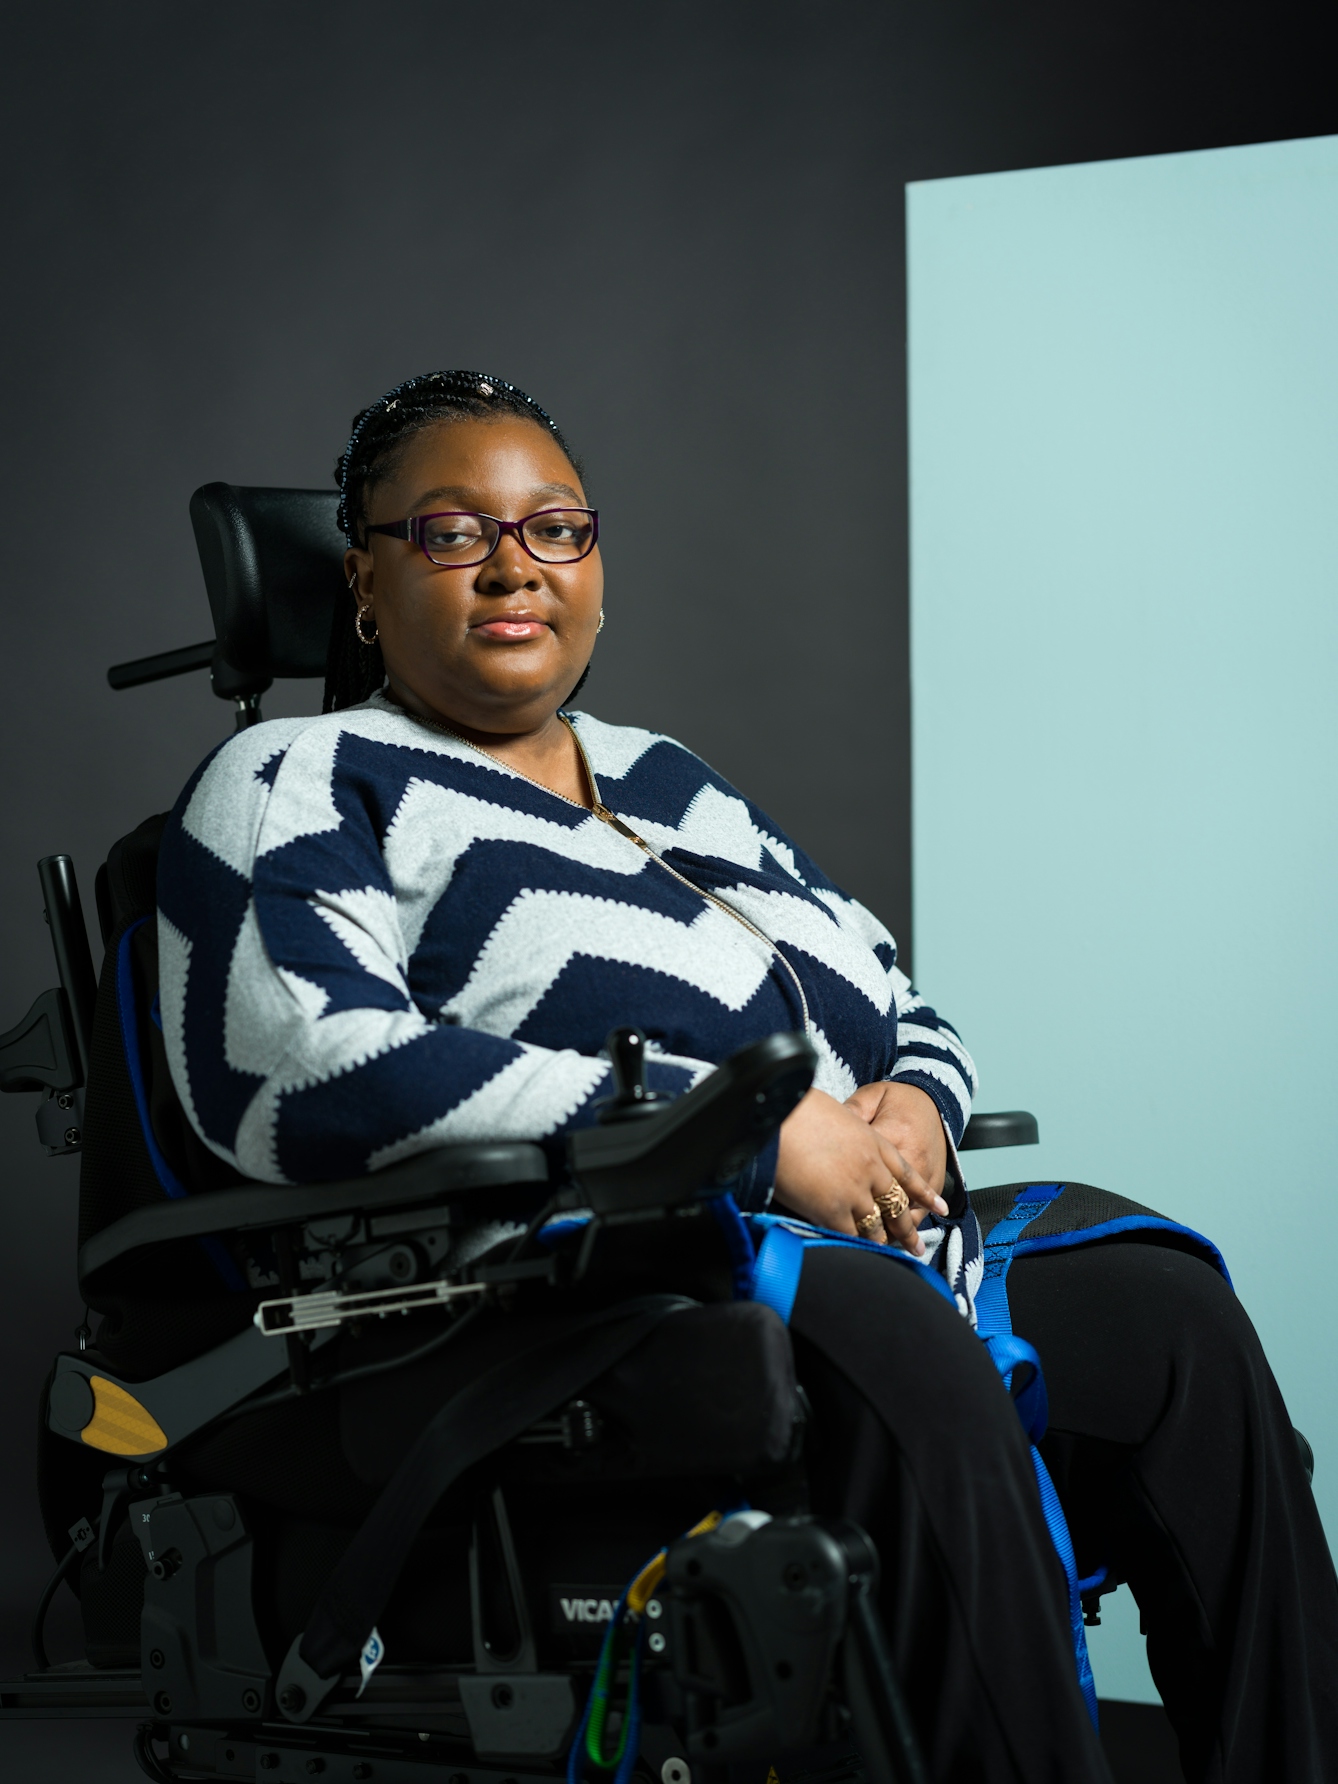 Colour photograph three-quarter length portrait of Matilda Feyiṣayọ Ibini, who is a black woman in a motorised wheelchair. She has braided hair, rectangular black glasses, a zig-zag navy and white jumper, and black trousers. She wears gold earrings and gold rings on her fingers.